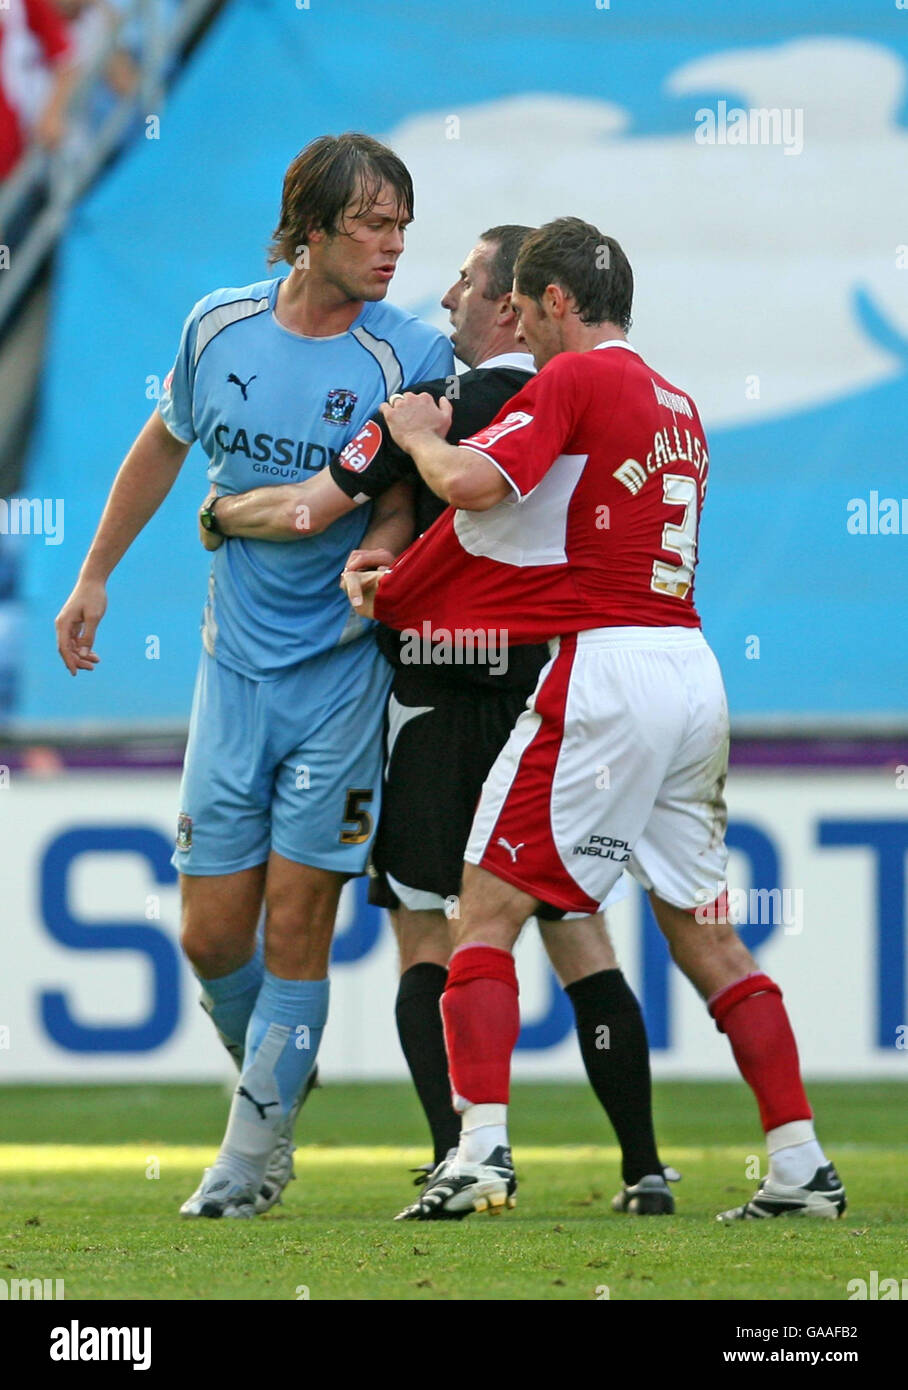 Coventry's Elliot Ward (left) clashes with Bristol City's Jamie McAllister, resulting in yellow cards for both players during the Coca-Cola Football Championship match at Ricoh Arena, Coventry. Stock Photo